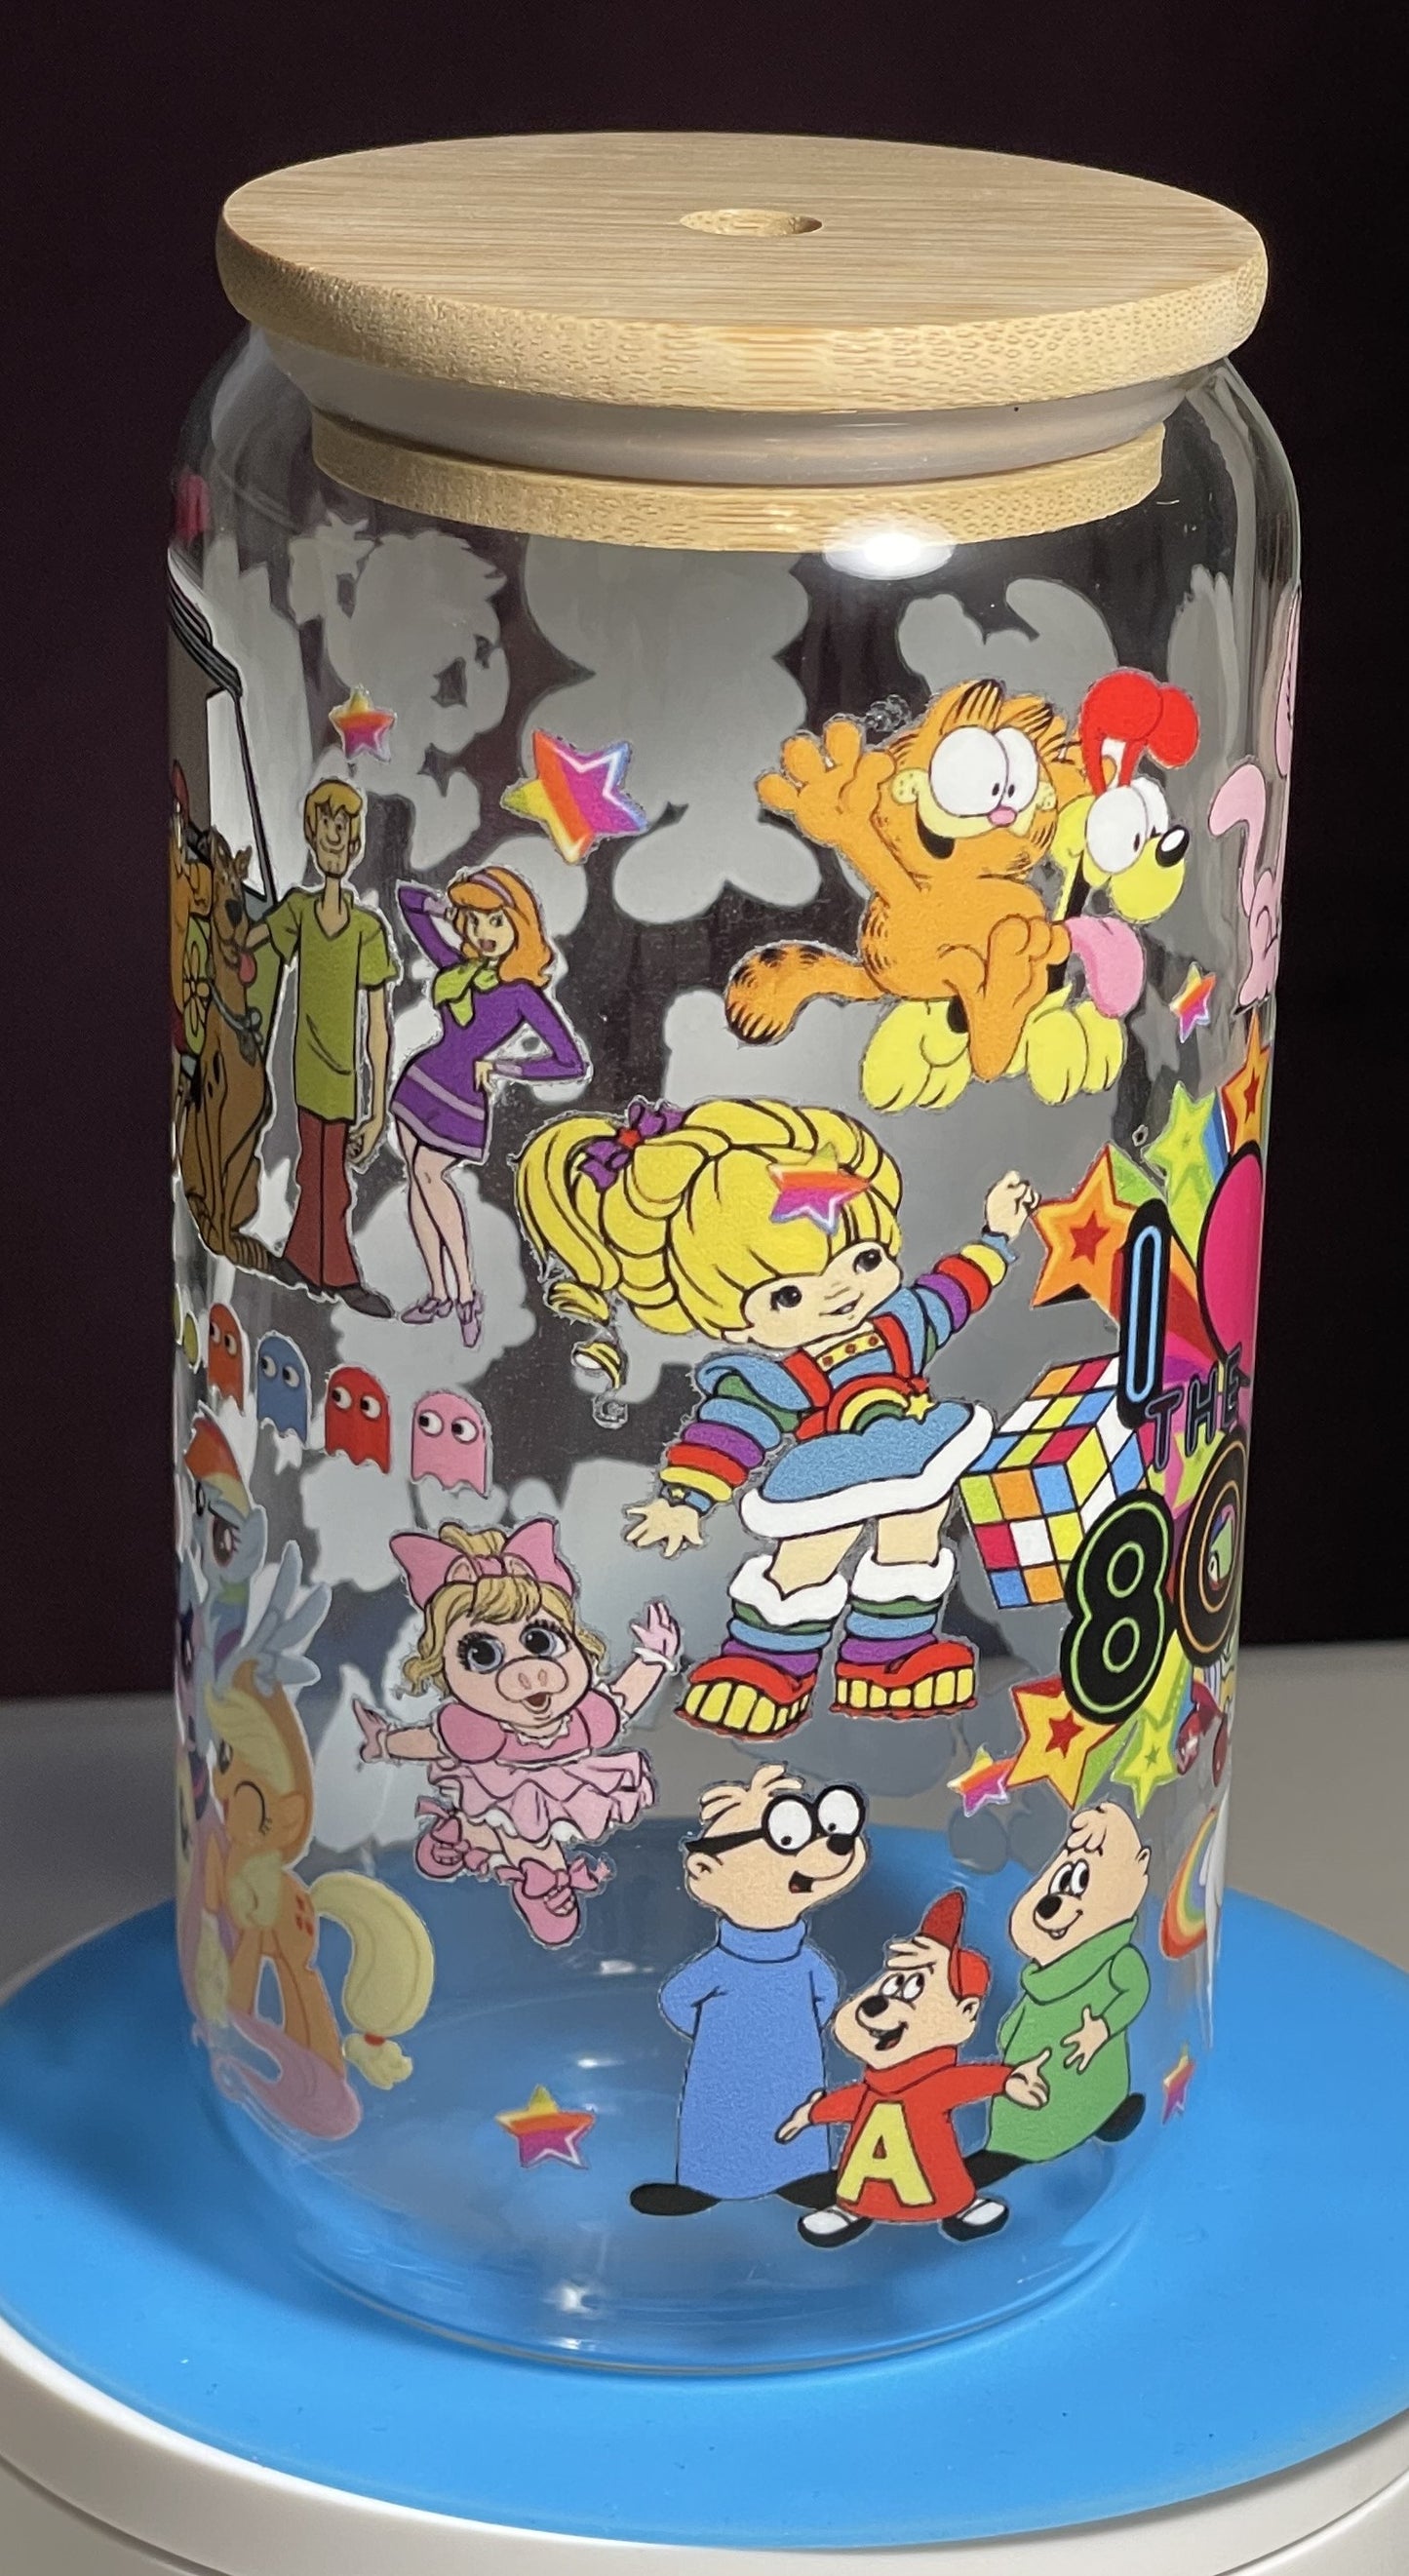 I love the 80's 16oz Glass Cup